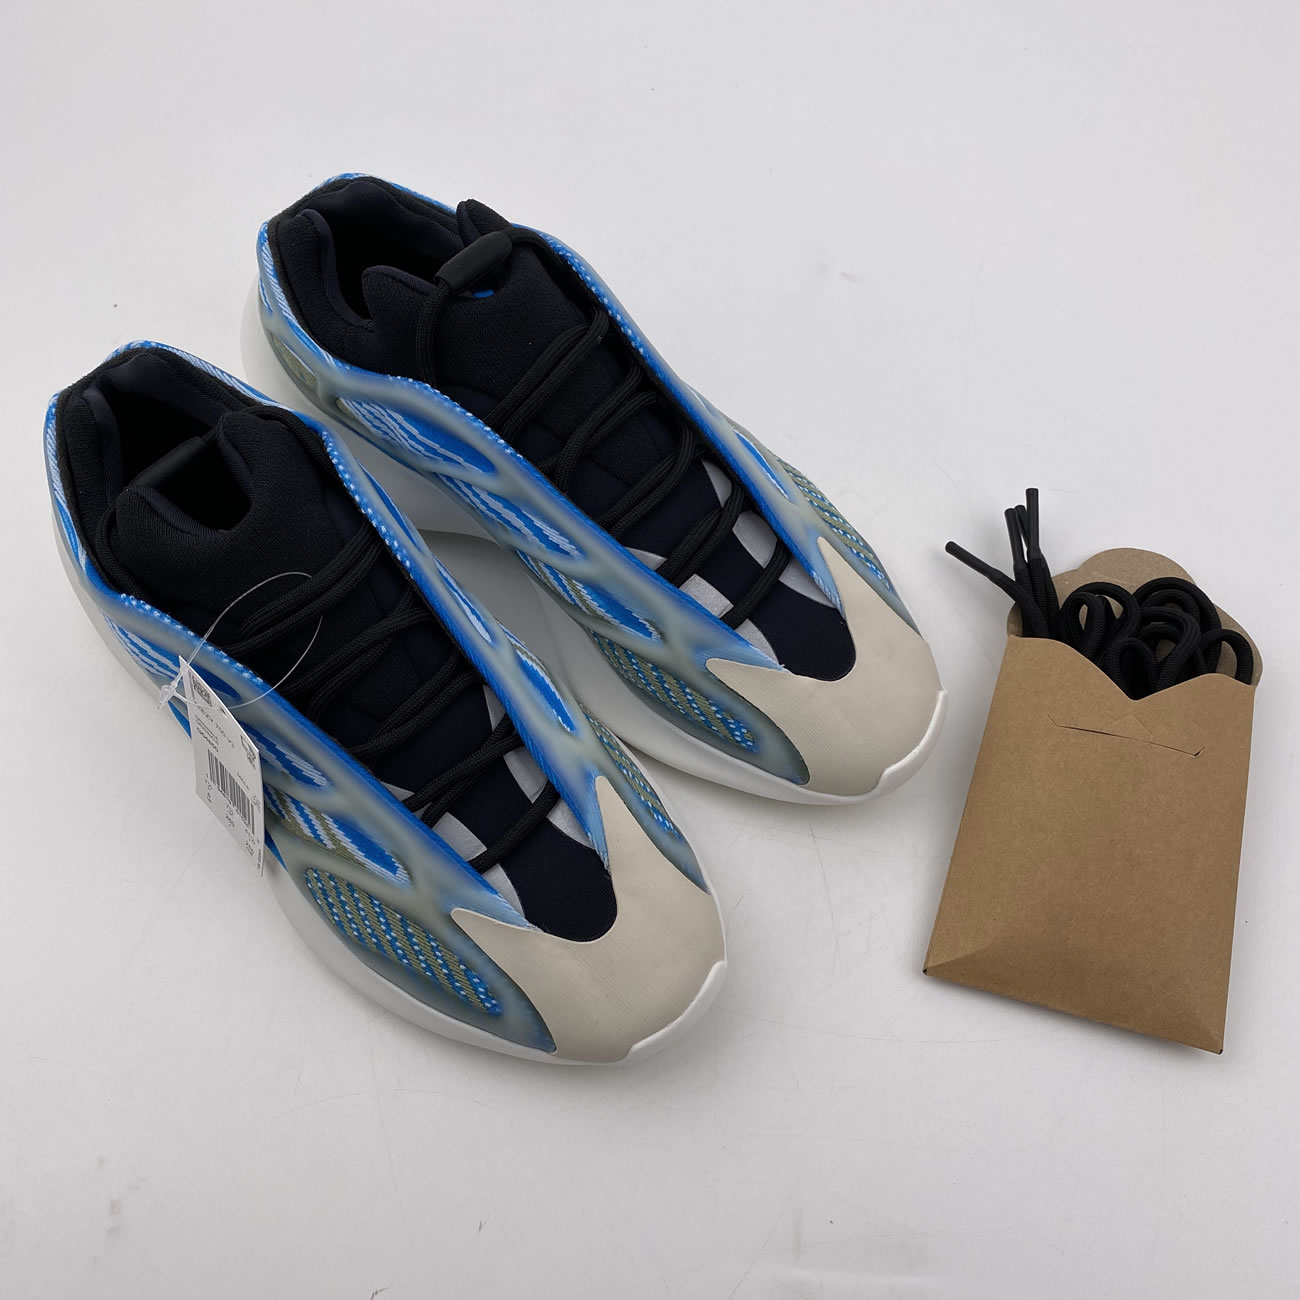 adidas Yeezy 700 V3 "Arazre" G54850 New Release Date For Sale